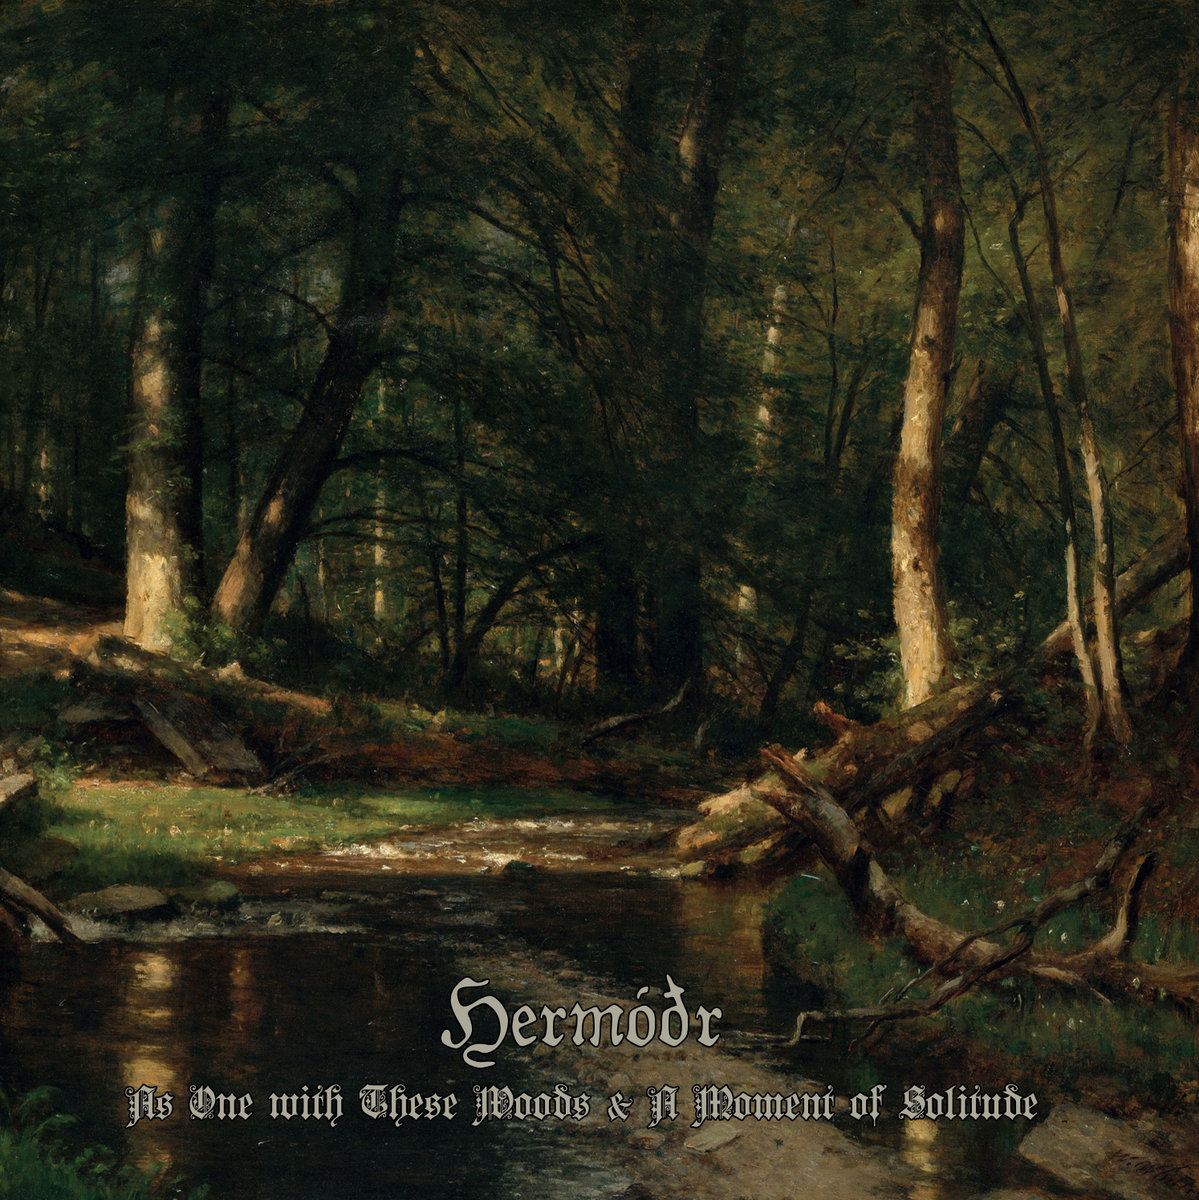 Hermodr - As One with These Woods & A Moment of Solitude  (Digipak)